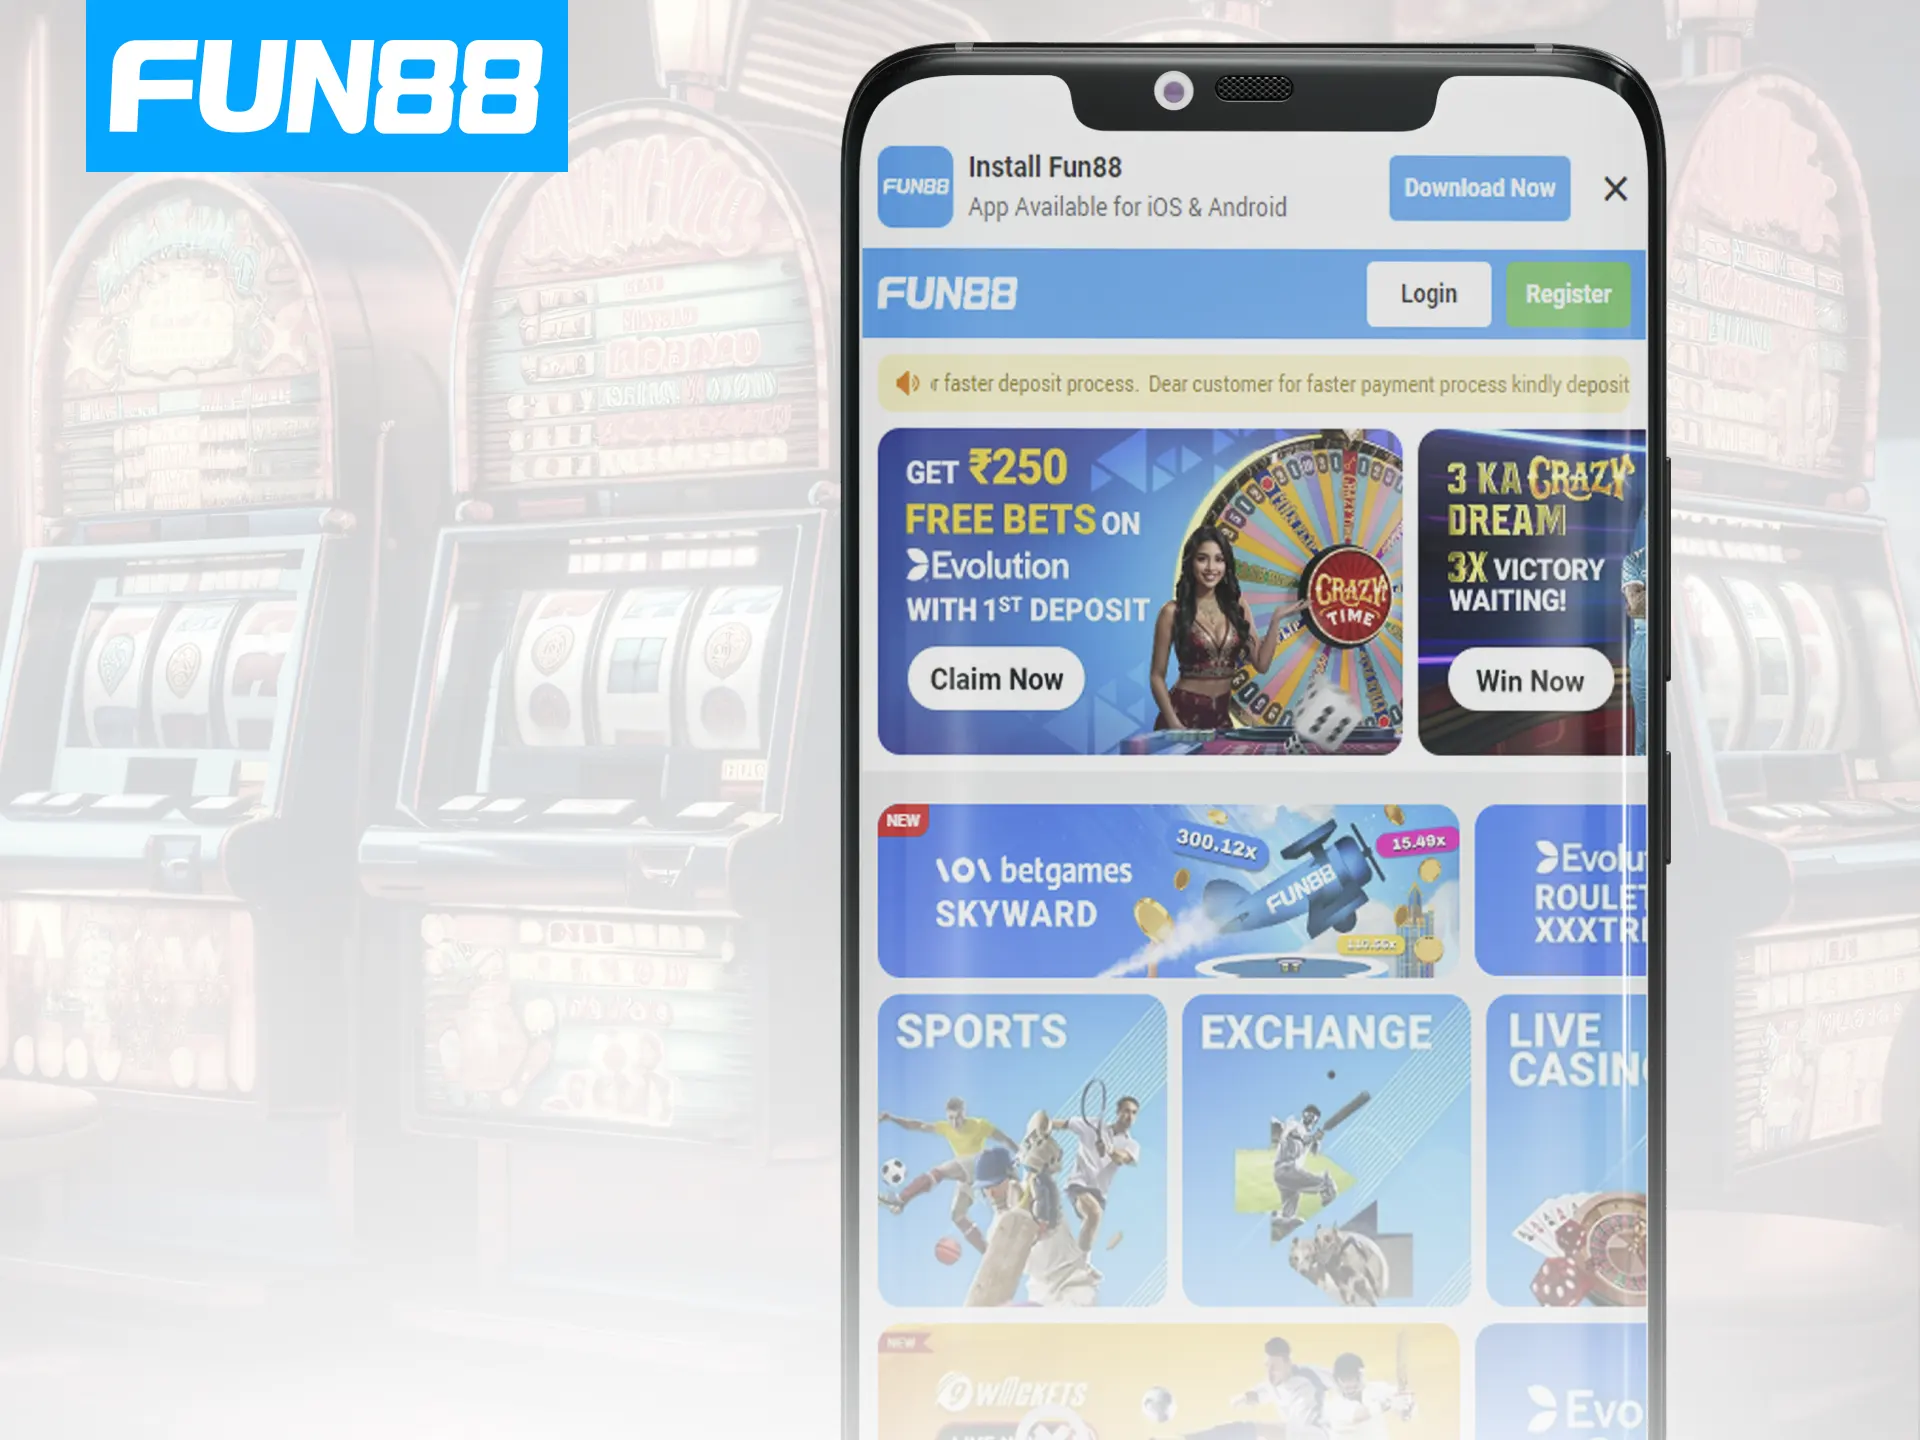 Access Fun88 mobile website and enjoy all functions from your phone.